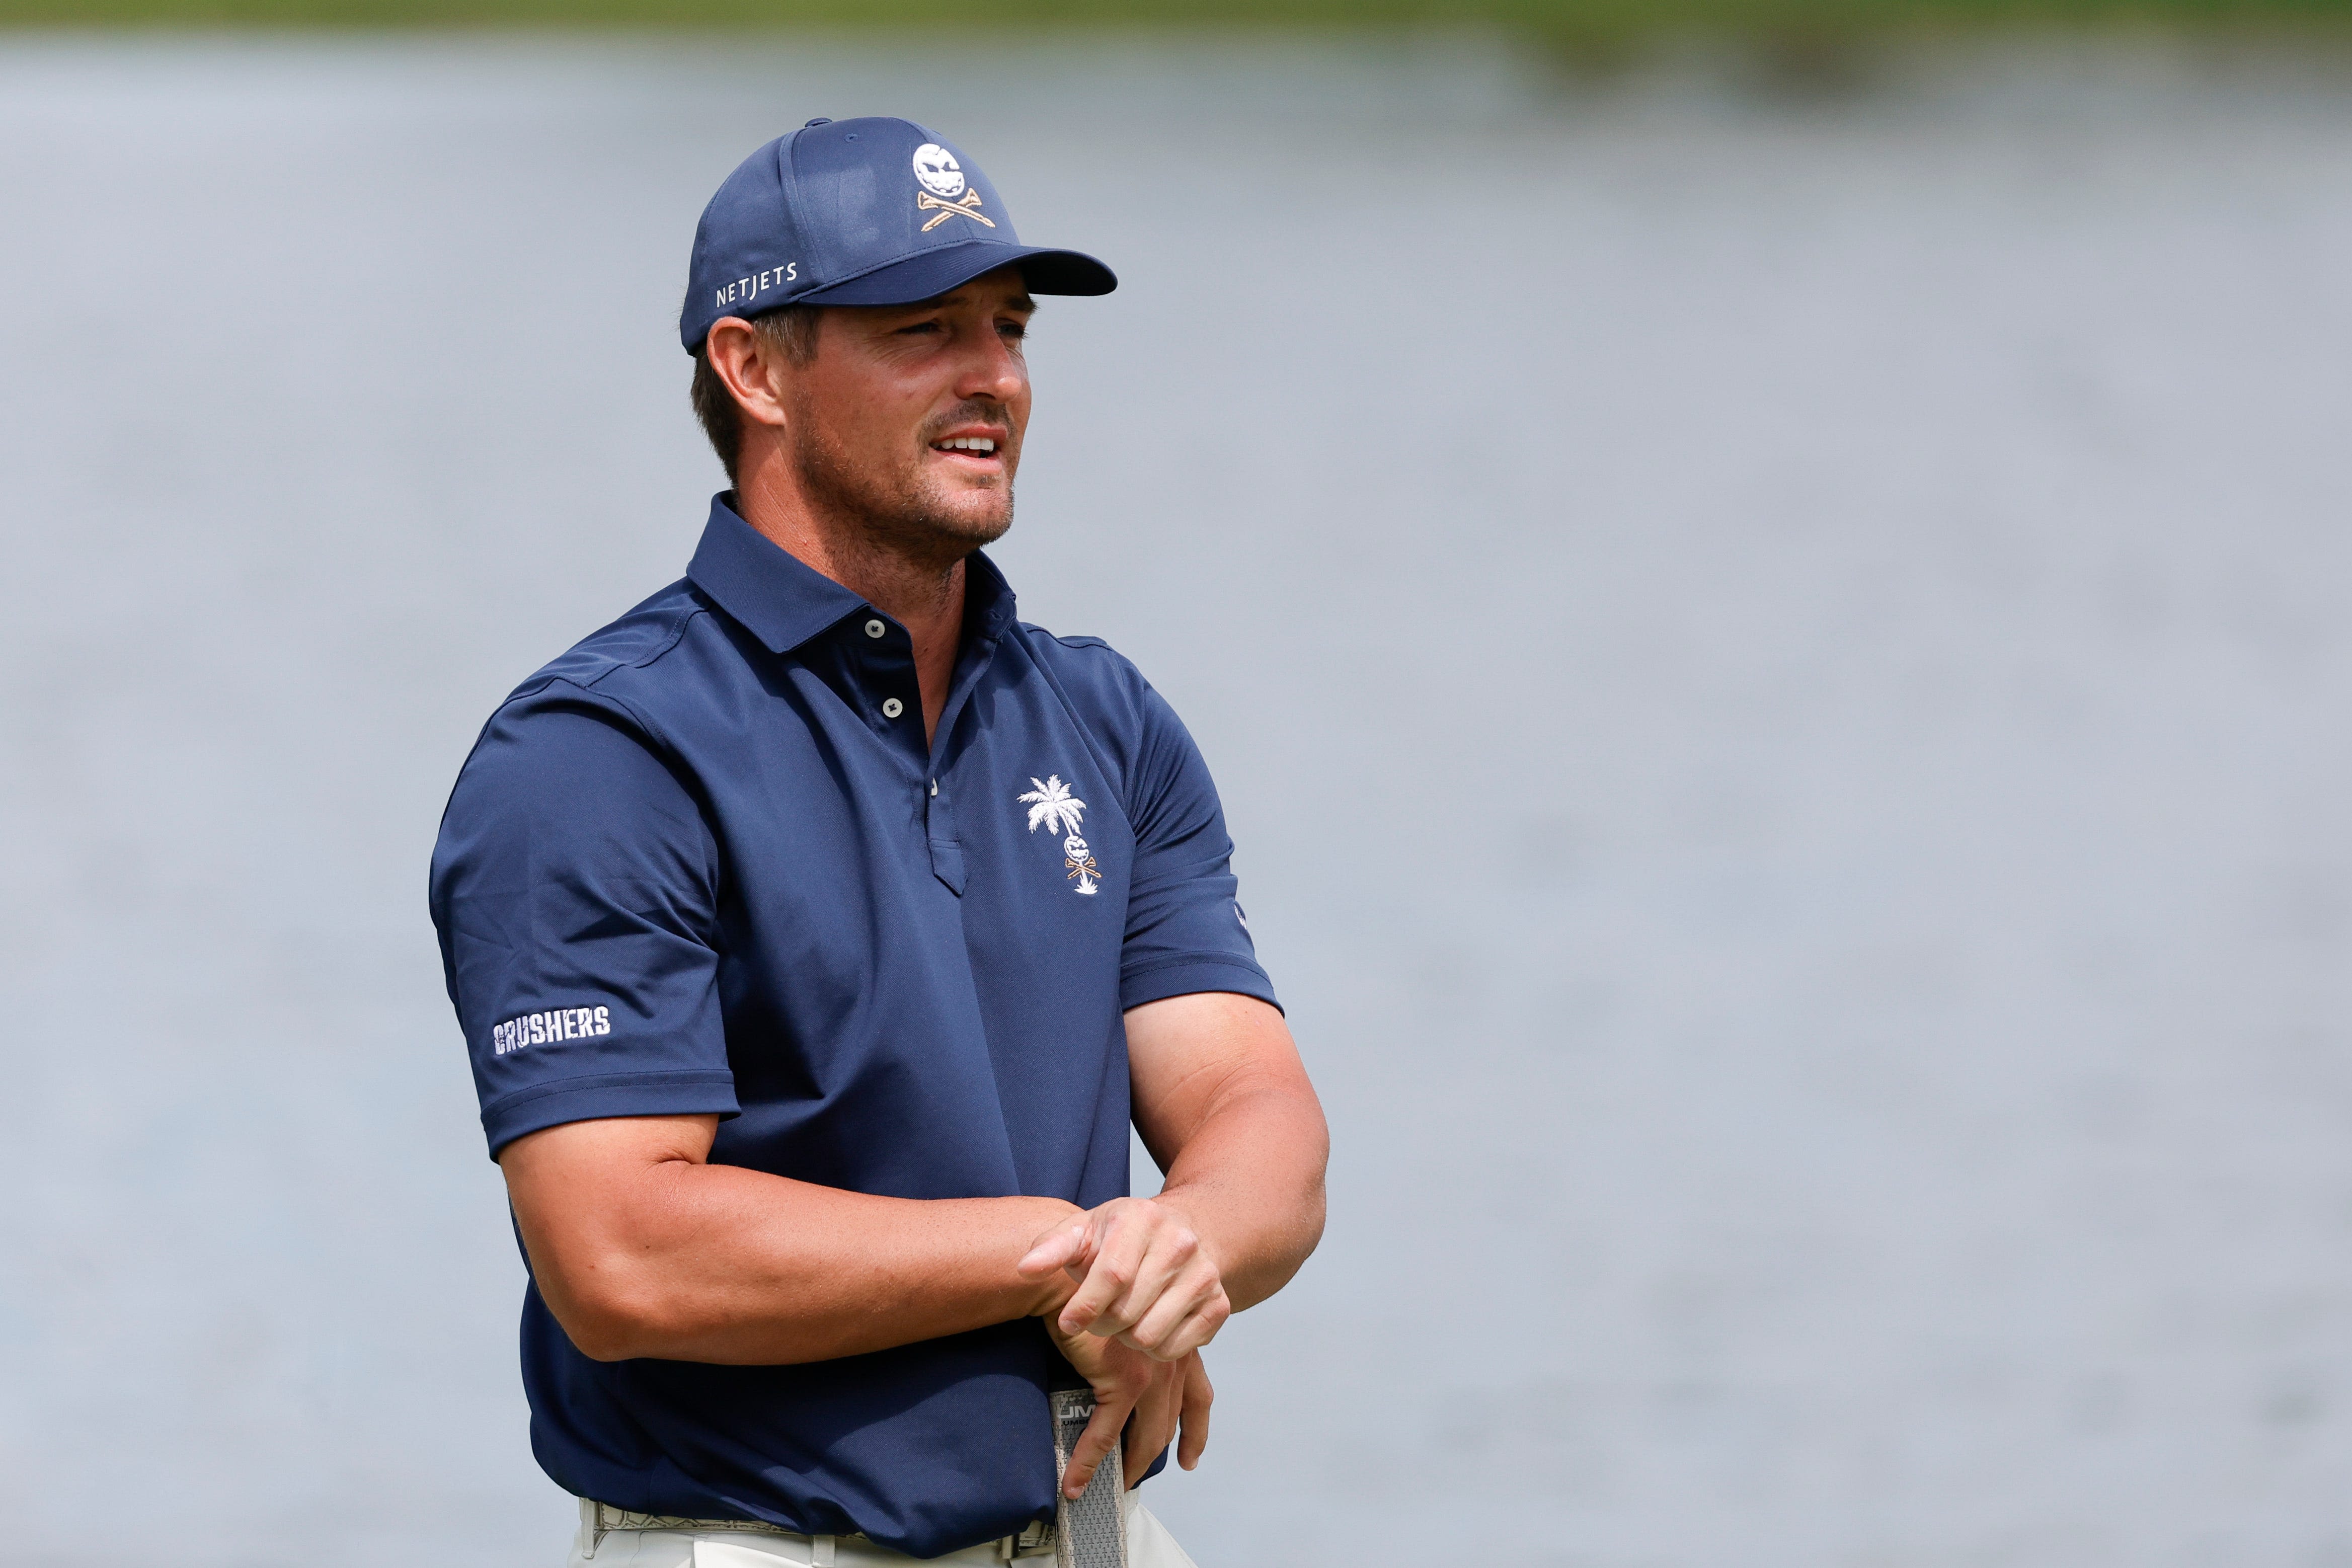 Bryson DeChambeau leads LIV golfers at PGA Championship. Here is how 11 who made cut fared